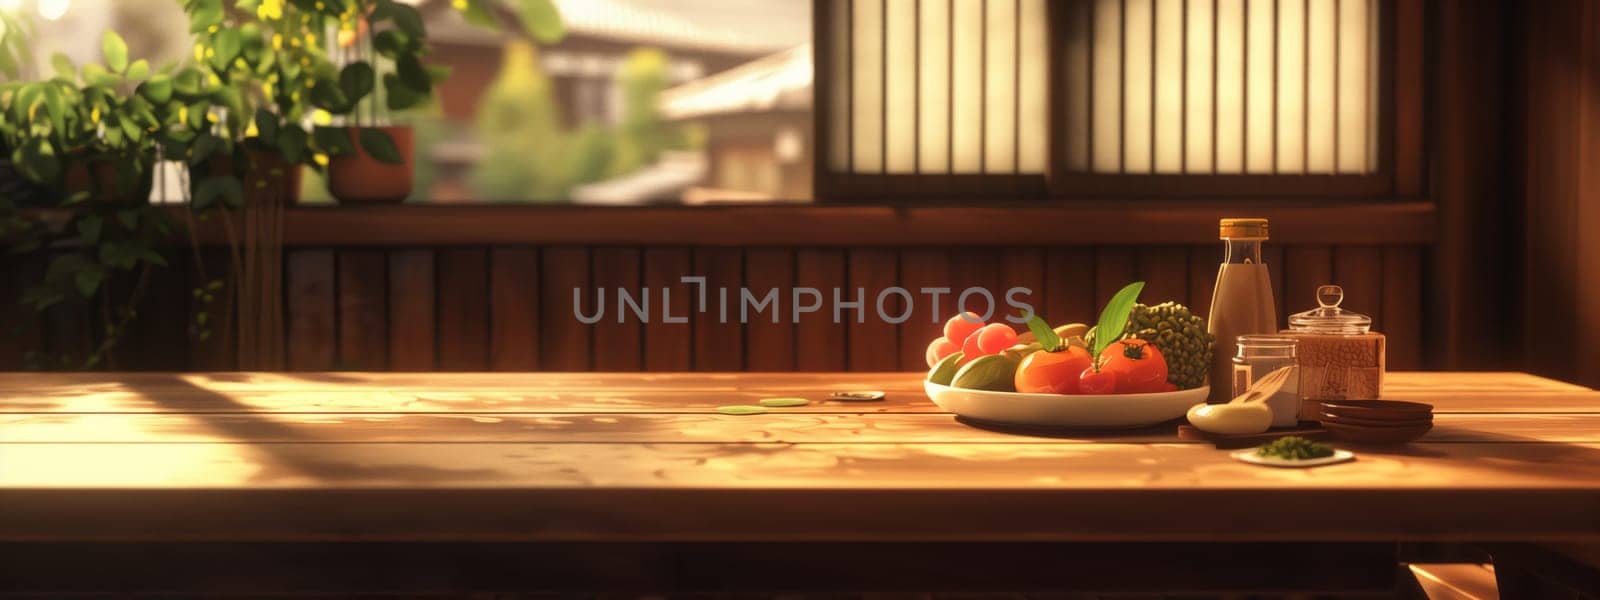 Wooden table with fresh fruit and vegetables, perfect for a healthy recipe by richwolf